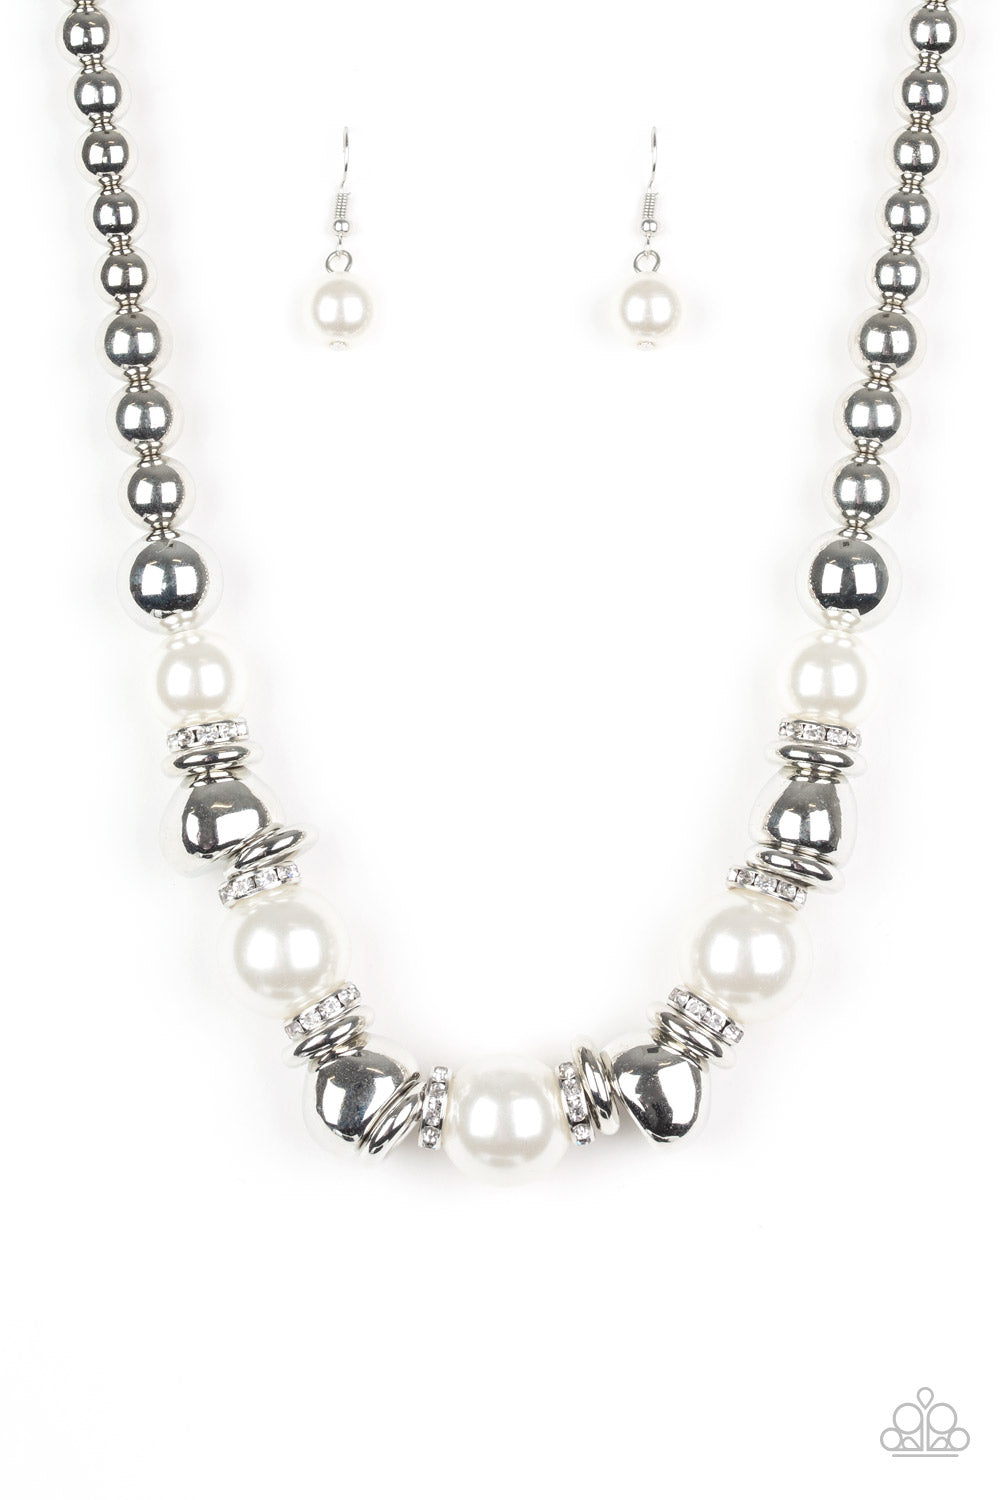 Hollywood HAUTE Spot - White Necklace